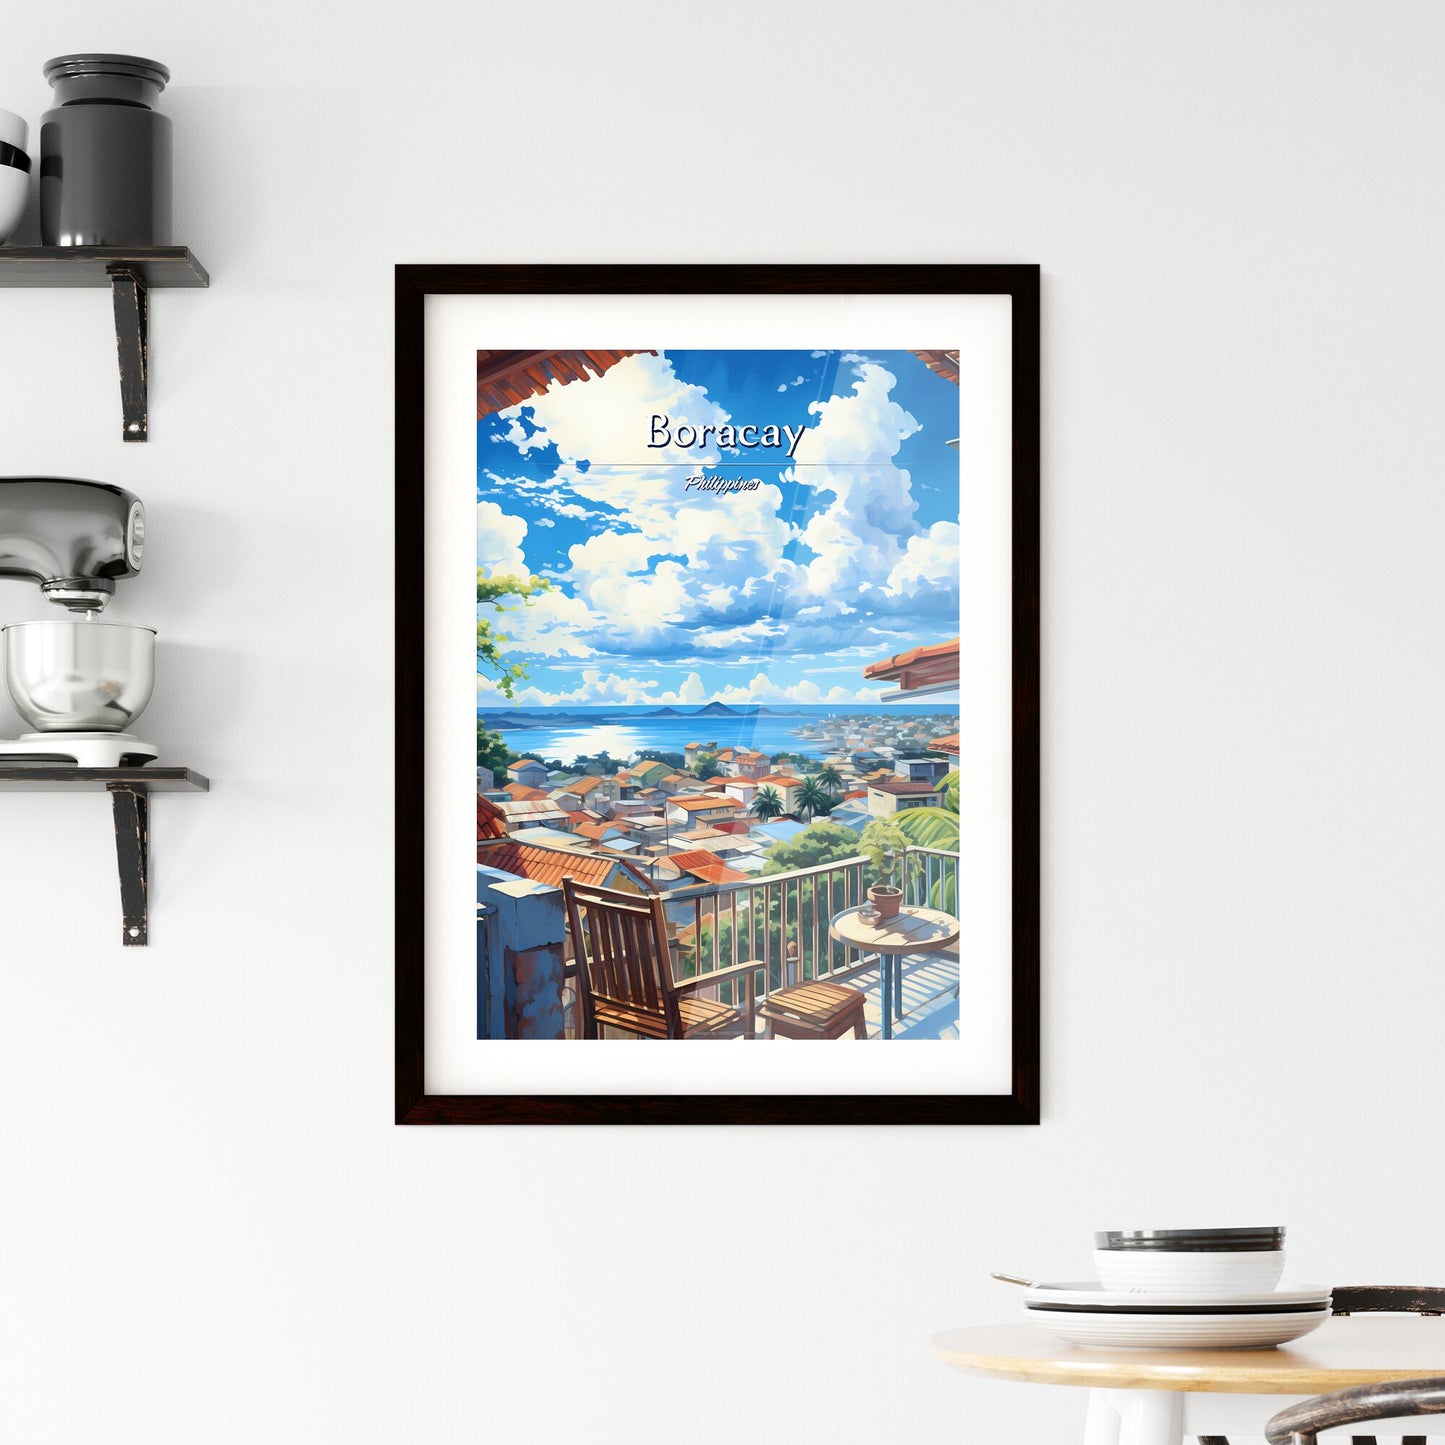 On the roofs of Boracay, Philippines - Art print of a view of a city from a balcony overlooking a body of water Default Title